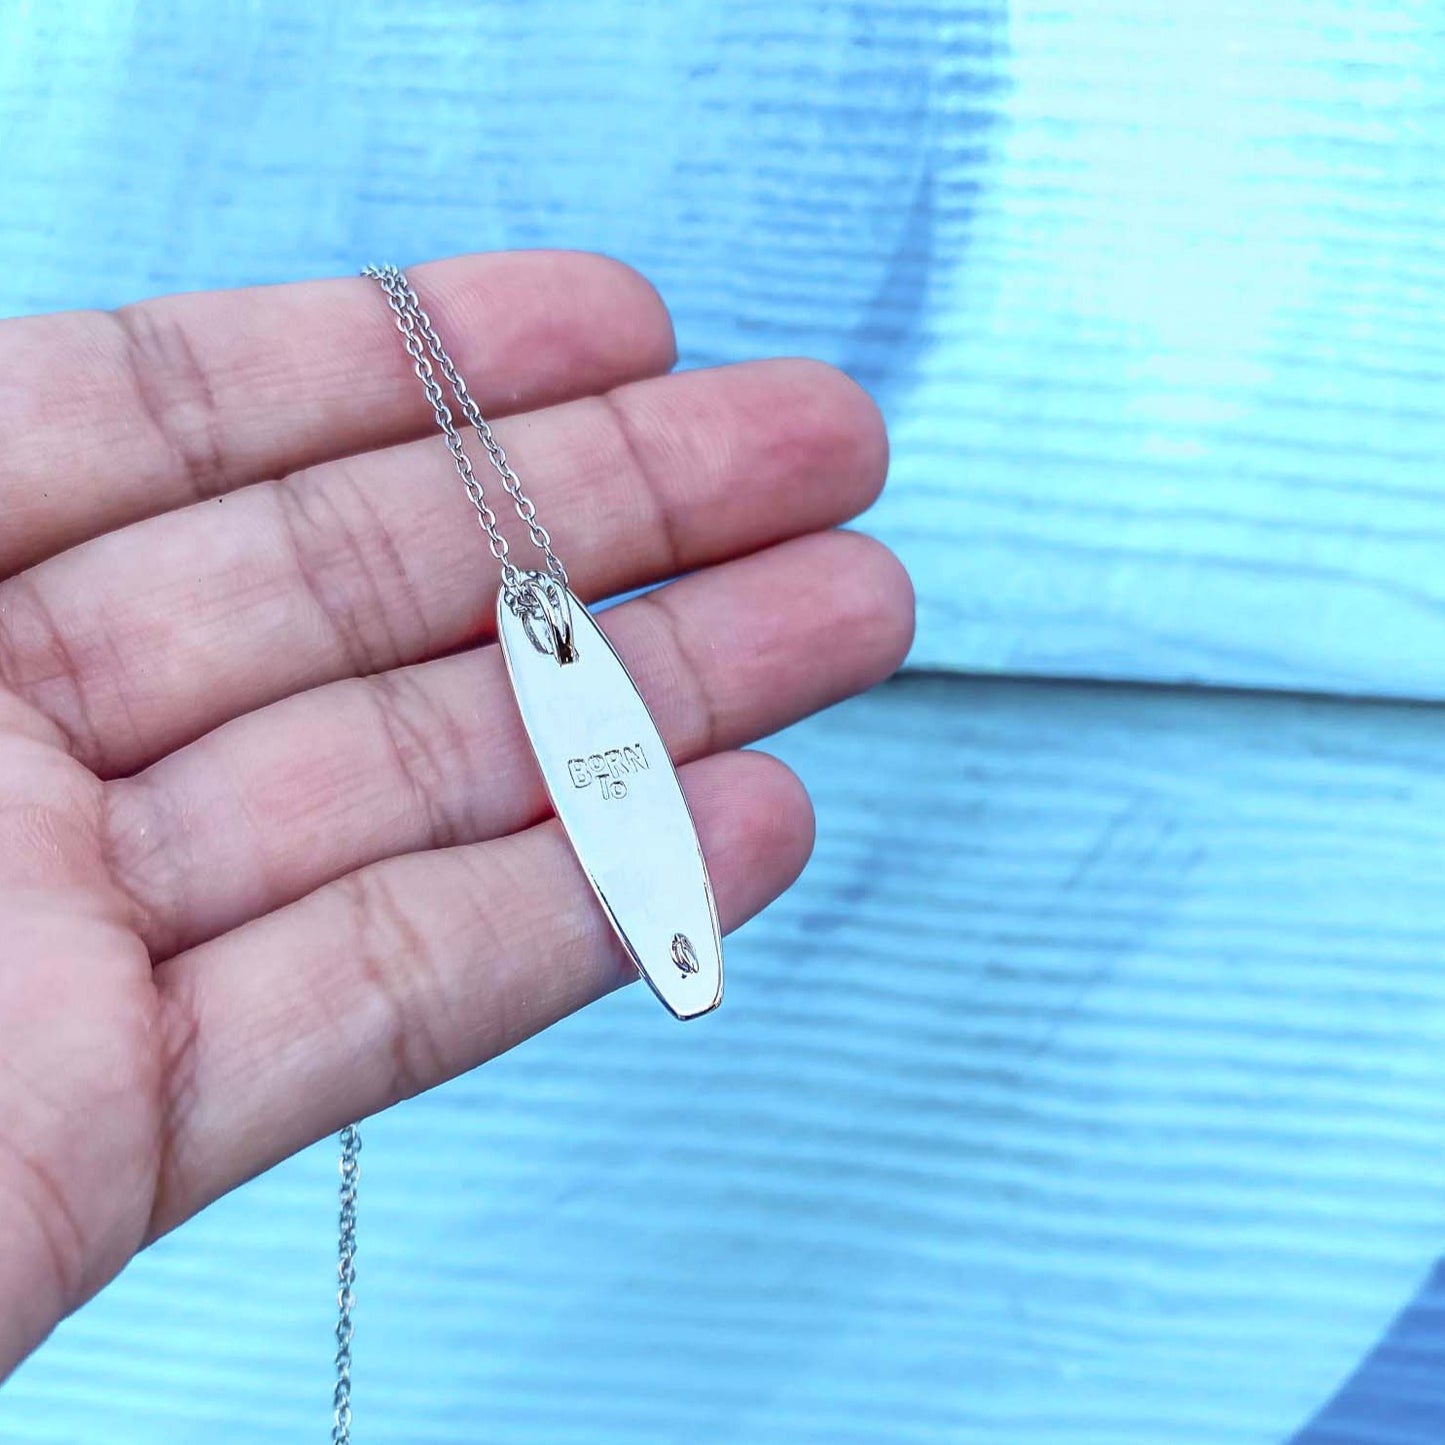 Silver longboard pendant necklace made by Born to rock jewelry